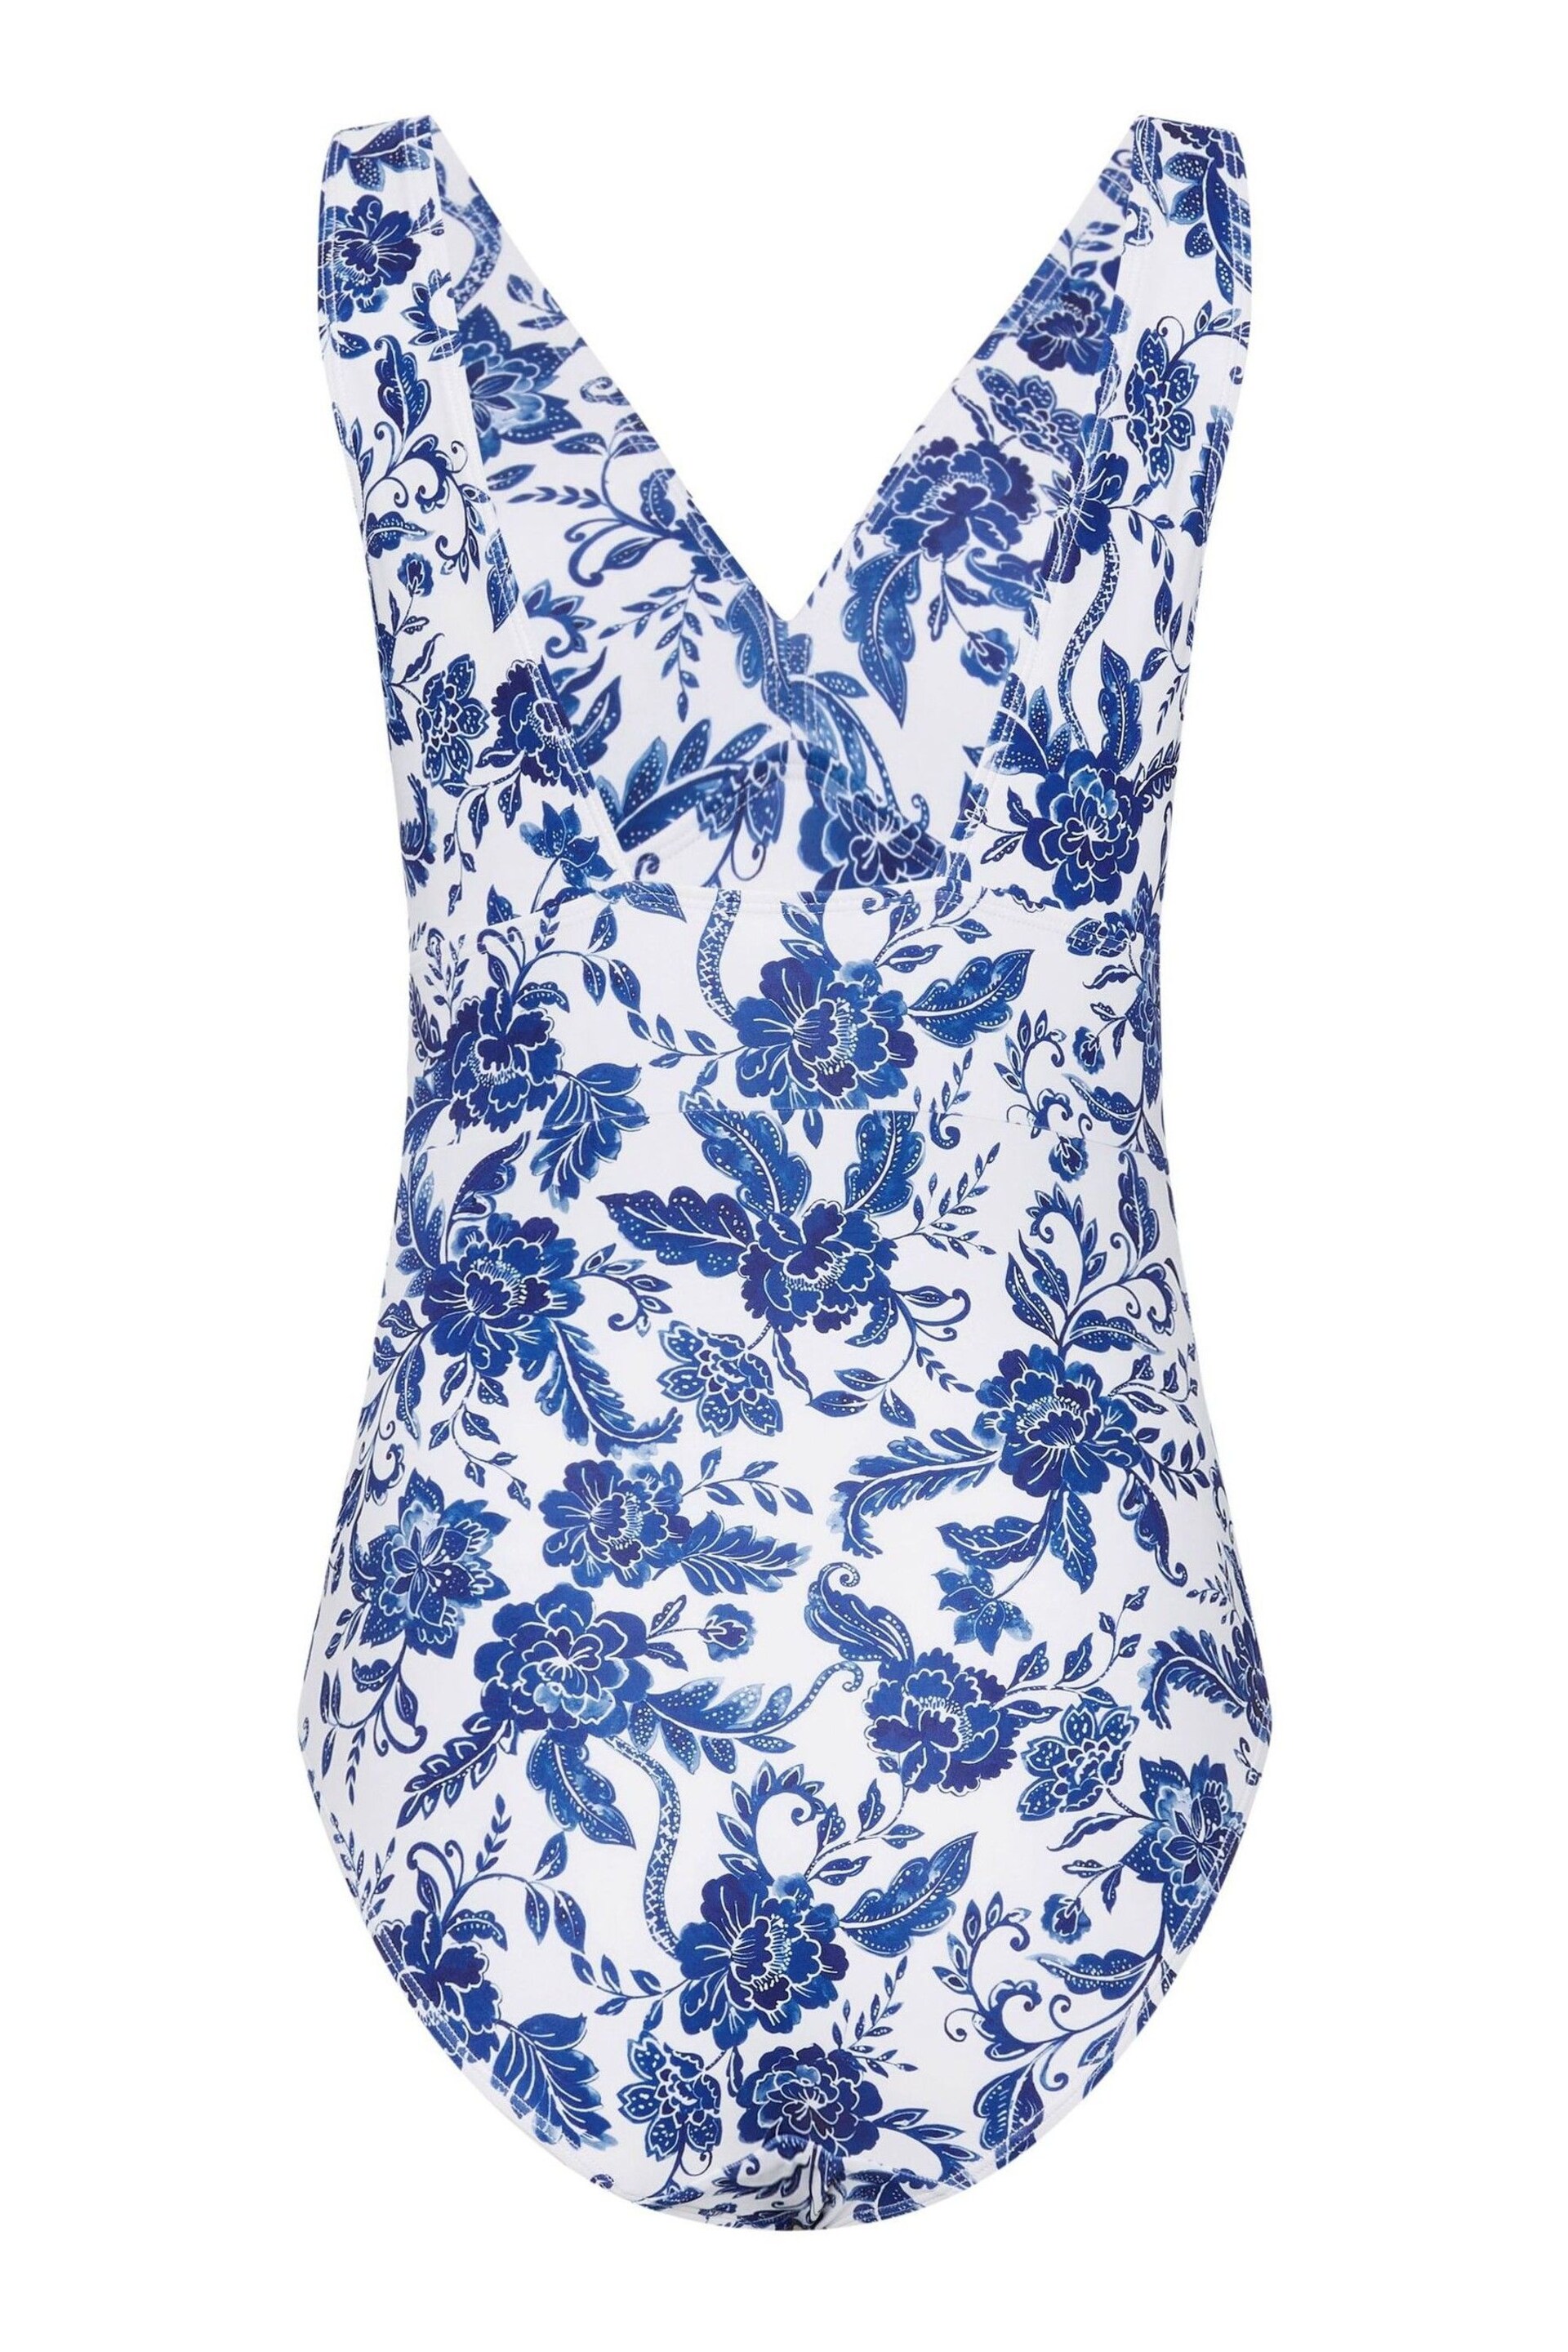 Long Tall Sally Blue LTS Tall Blue & White Floral Print Swimsuit - Image 6 of 6